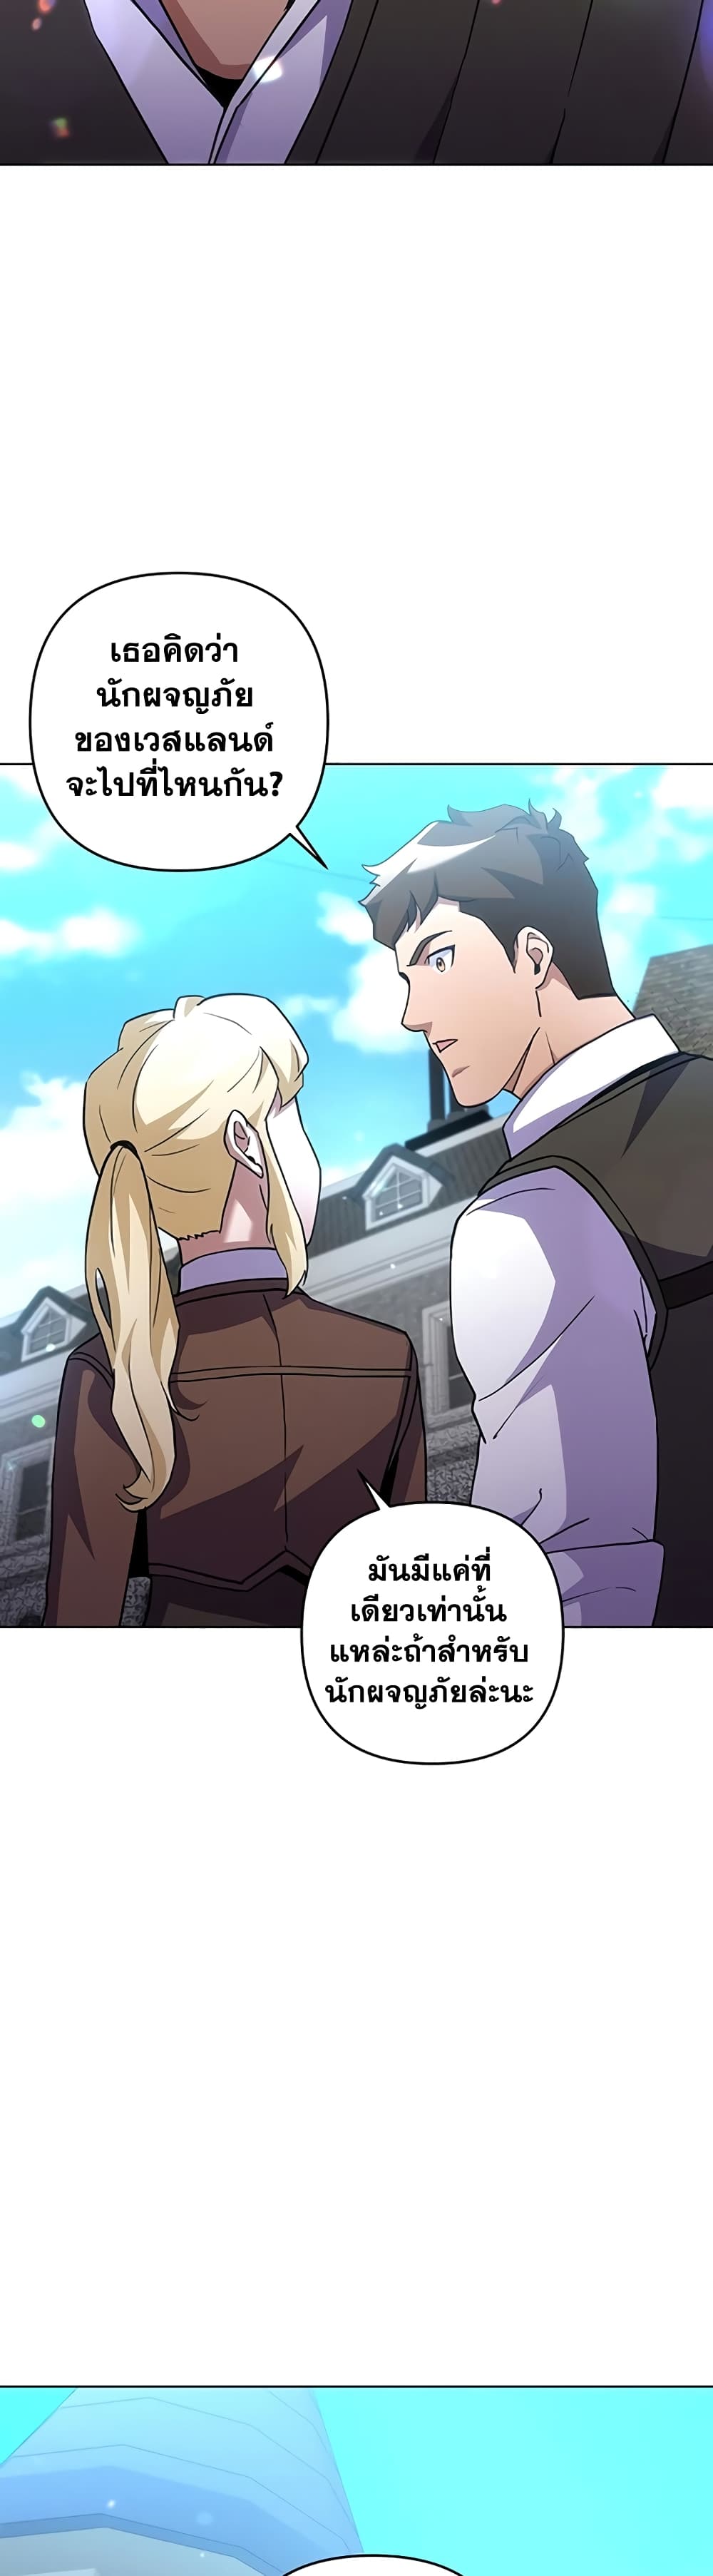 Surviving in an Action Manhwa 18 09